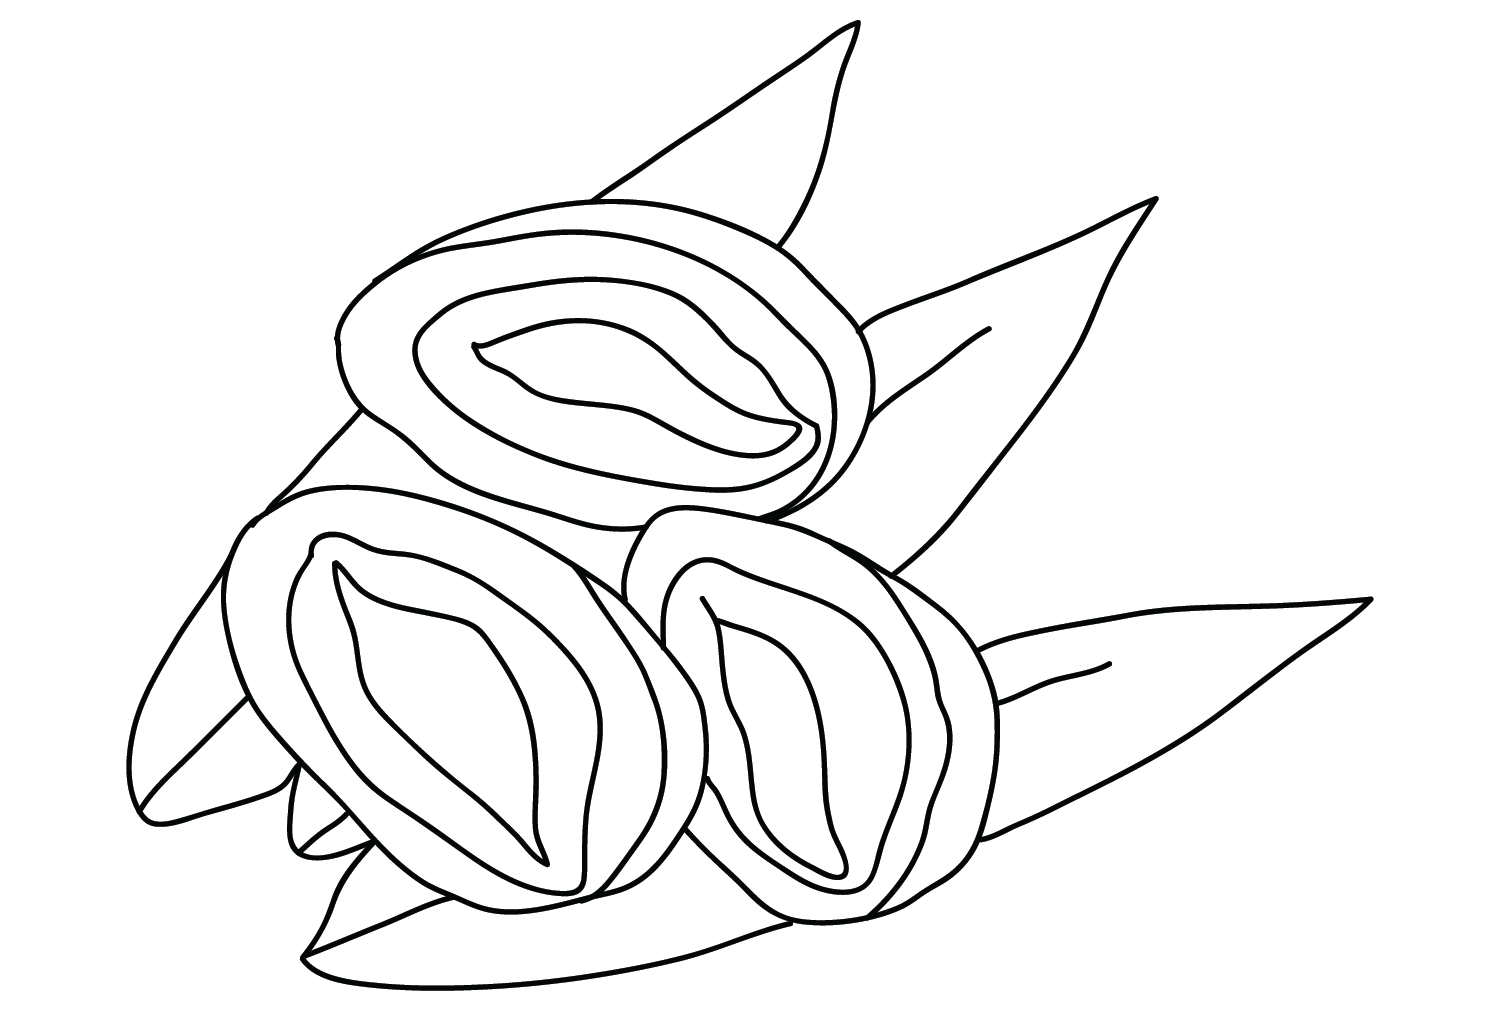 Abalone Coloring Sheet for Kids from Abalone